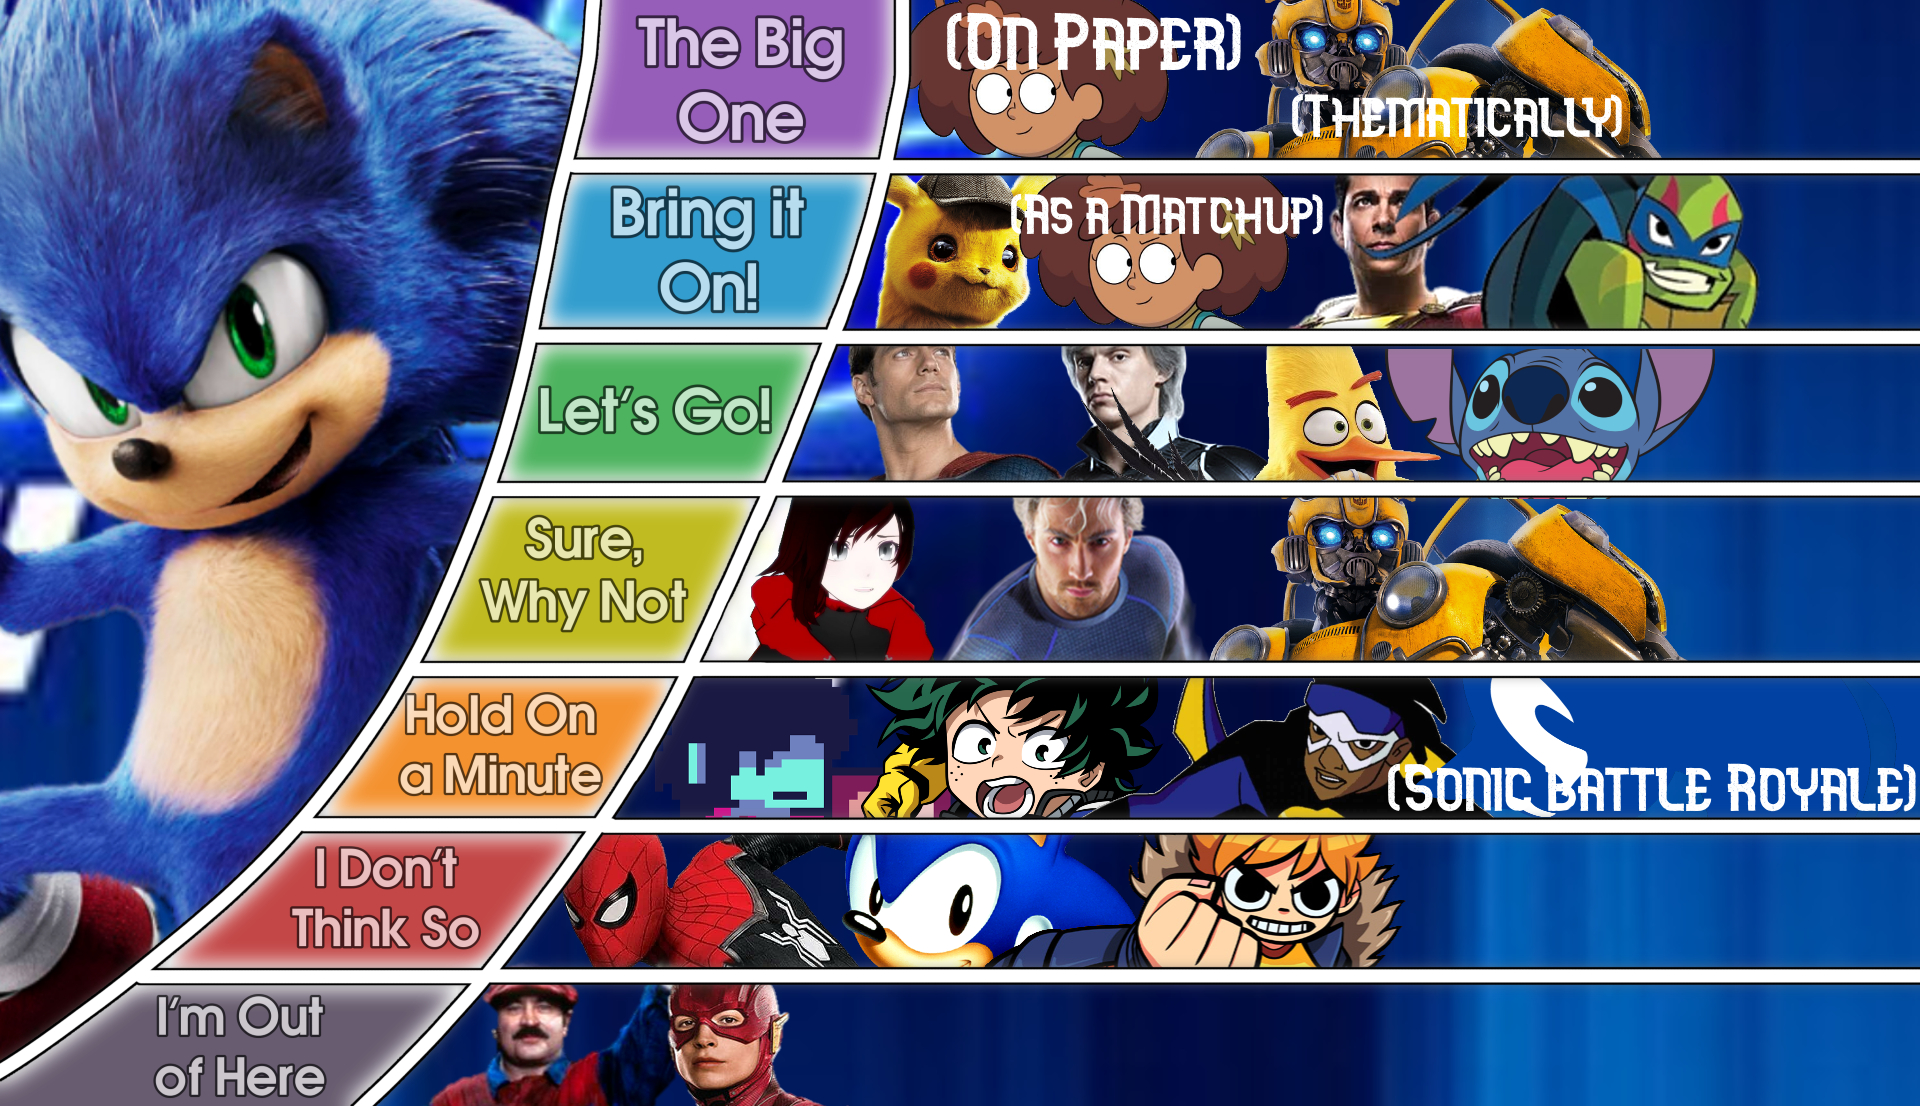 billehbawb ☆ on X: Just spent the last 2 hours making a definitive sonic  games tier list with the help of my ~70 live viewers. We have come together  to provide the